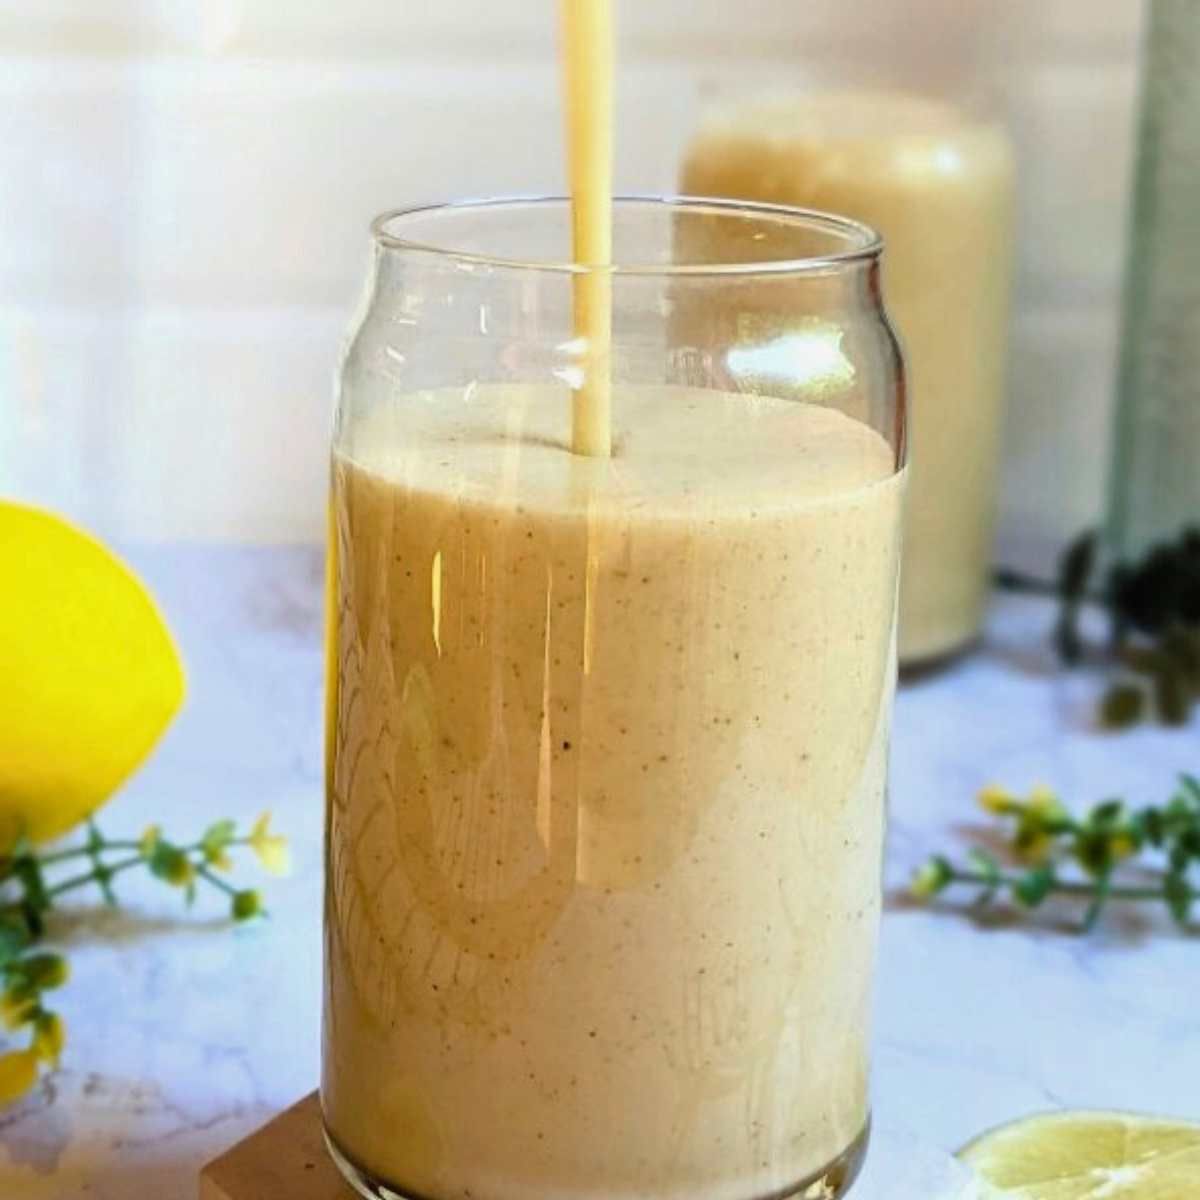 a tall can shaped glass being filled with a lemon smoothie with a light yellow color.